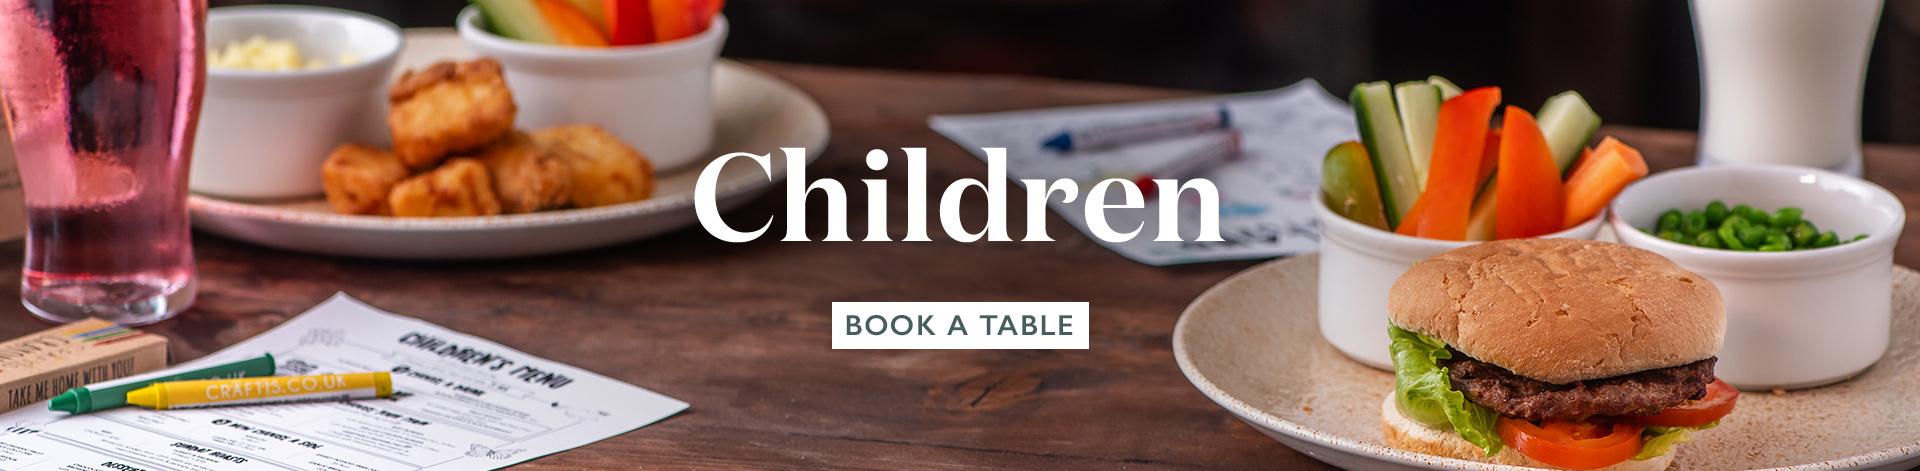 Children's Menu at The Crooked Chimney